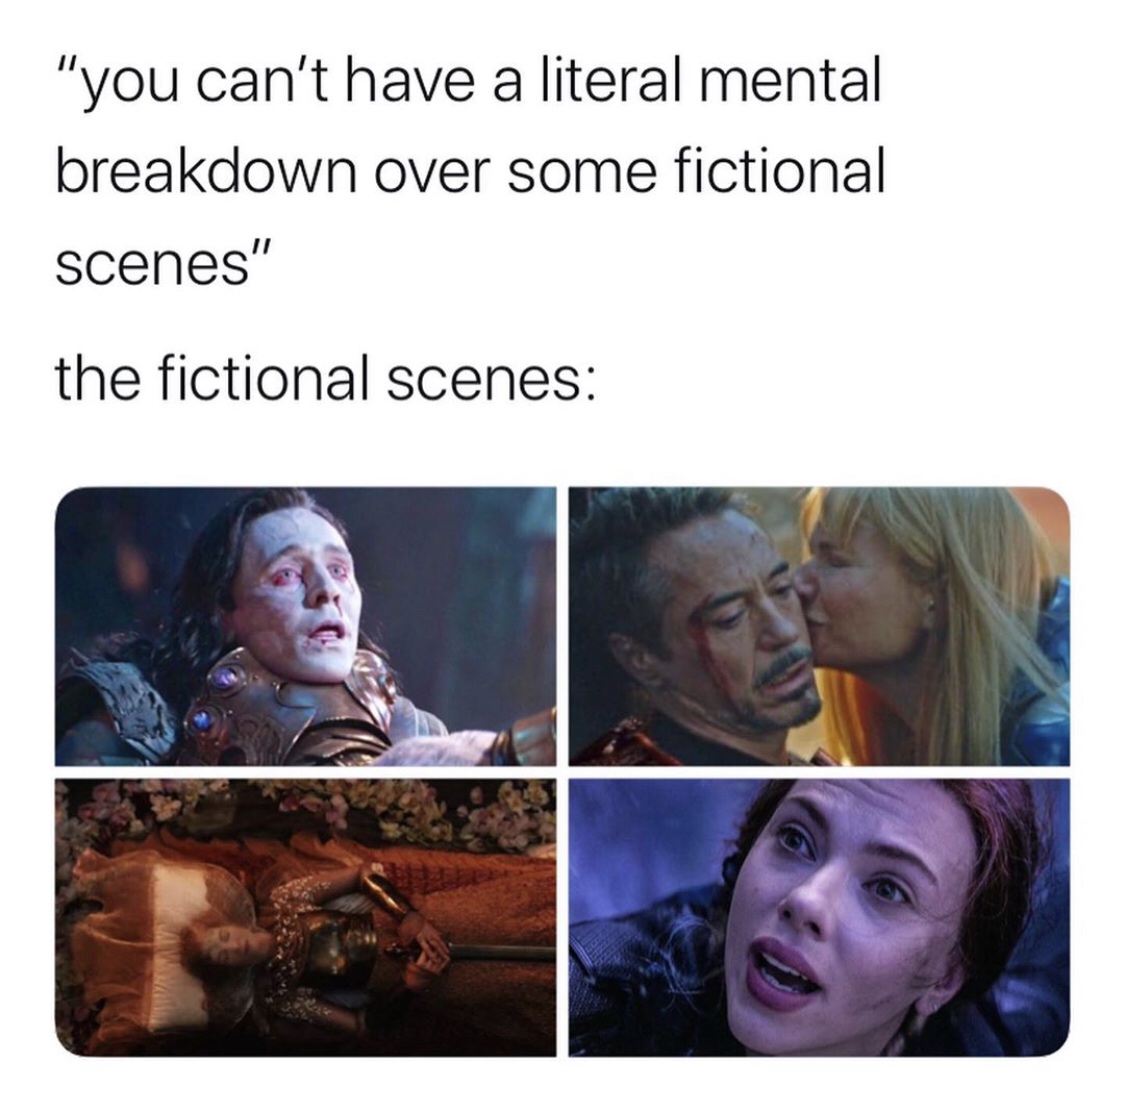 media - "you can't have a literal mental breakdown over some fictional scenes" the fictional scenes